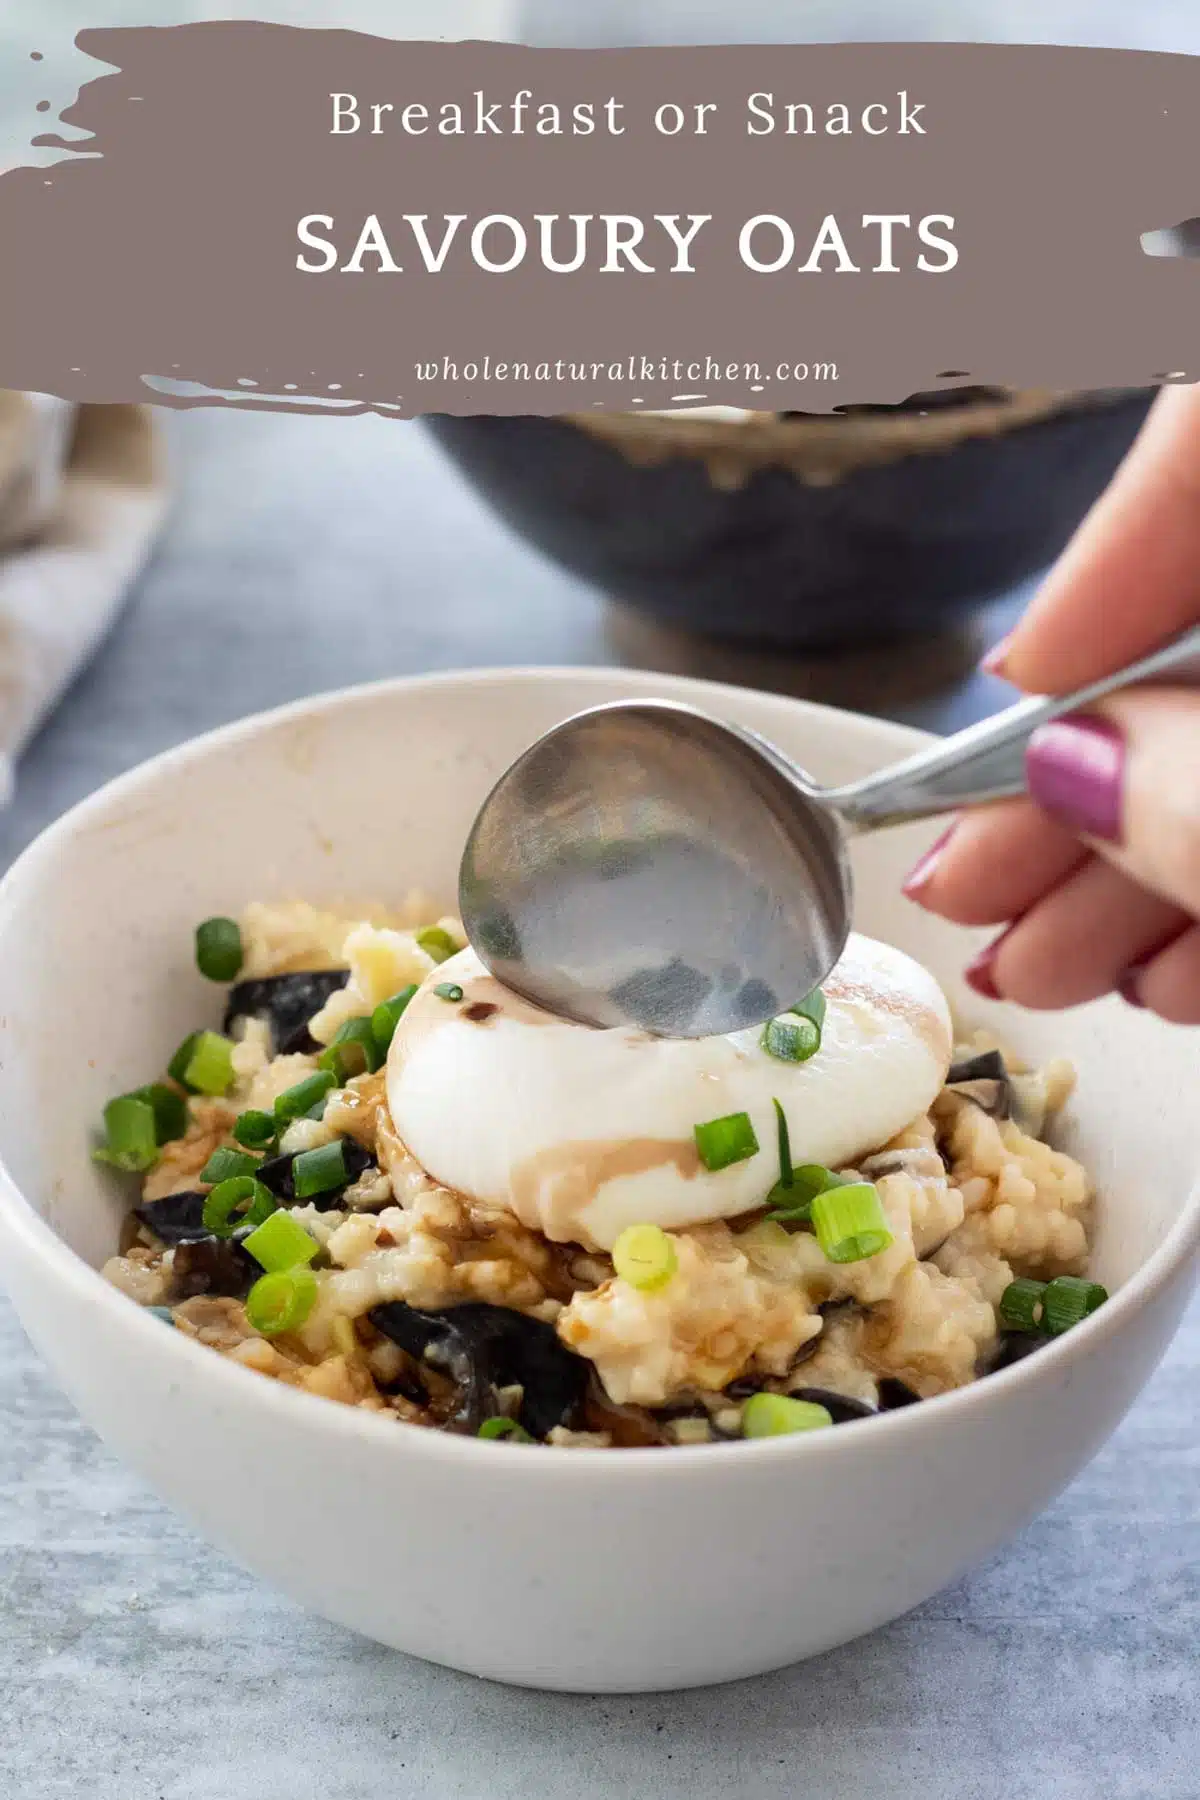 A pinterest poster image showing the title of the recipe and website at the top, and a white bowl filled with savoury oats down the bottom. A white hand with dark pink nail polish is dipping a spoon into the poached eggs on top of the oats.